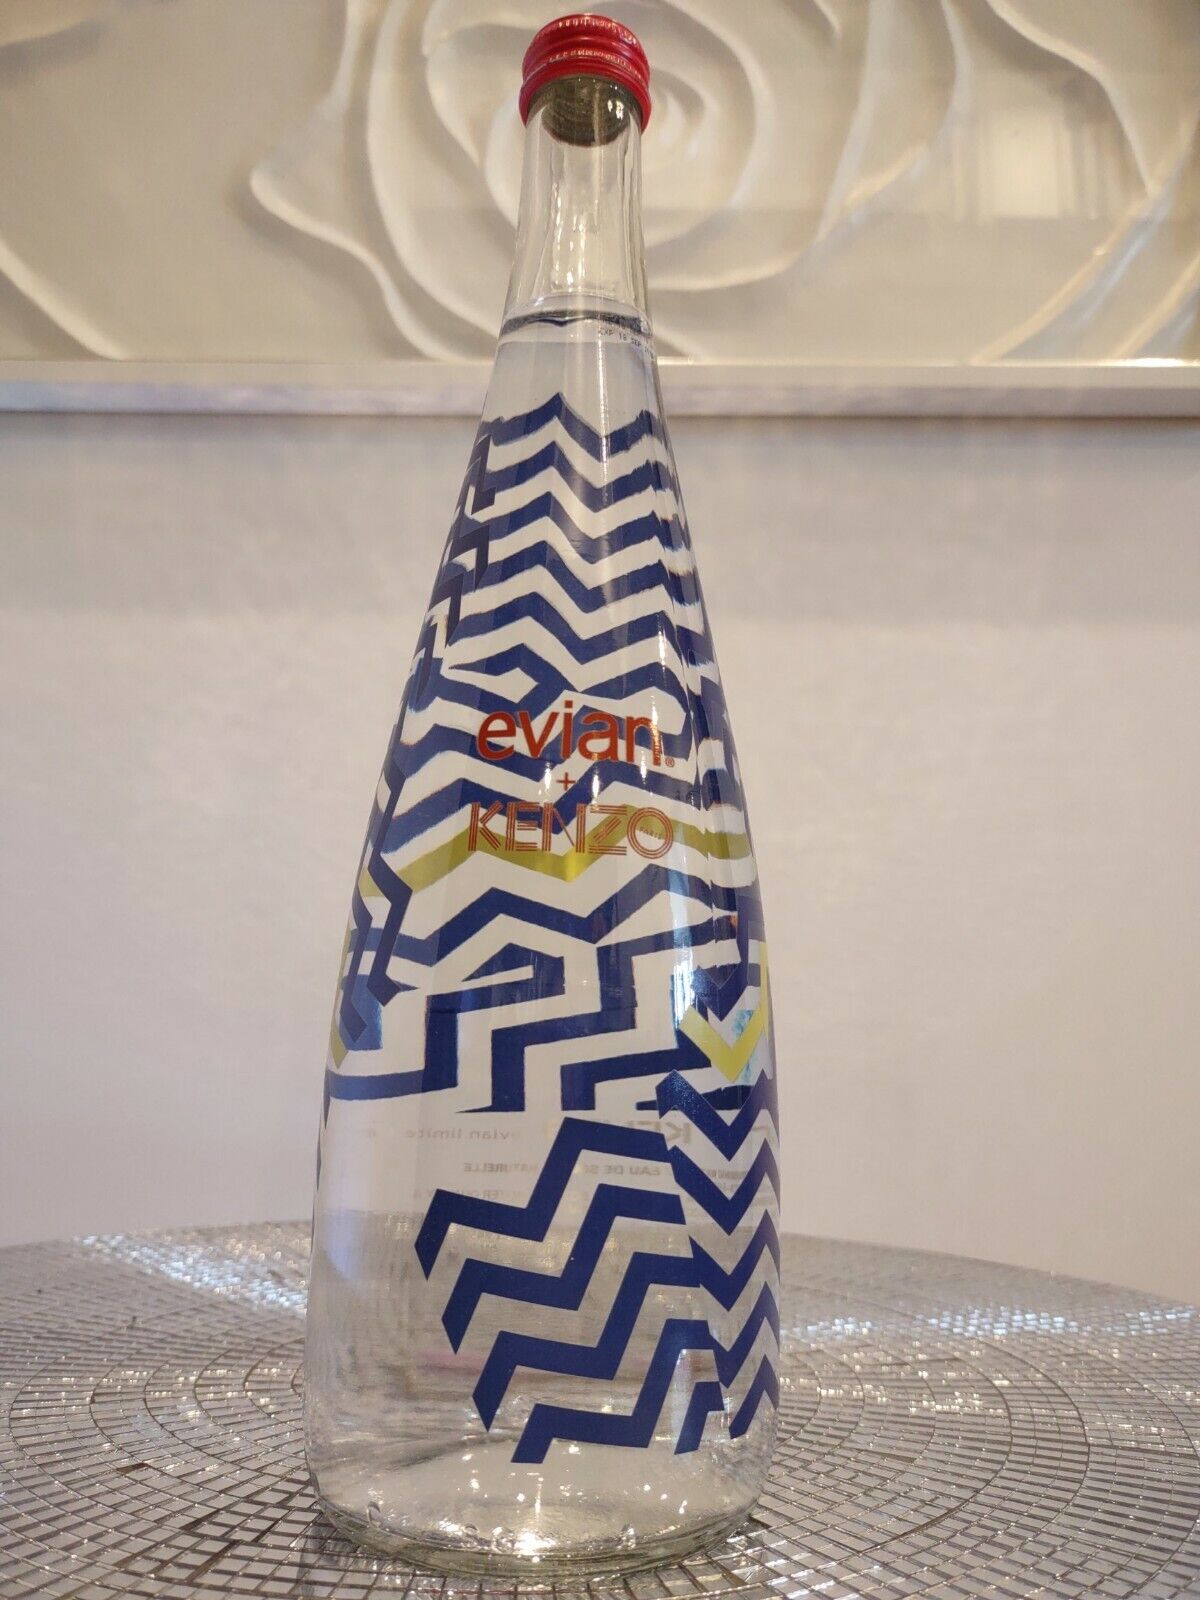 Kenzo EVIAN Glass Collectible Water bottle Special Edition Paris 2014 Sealed New